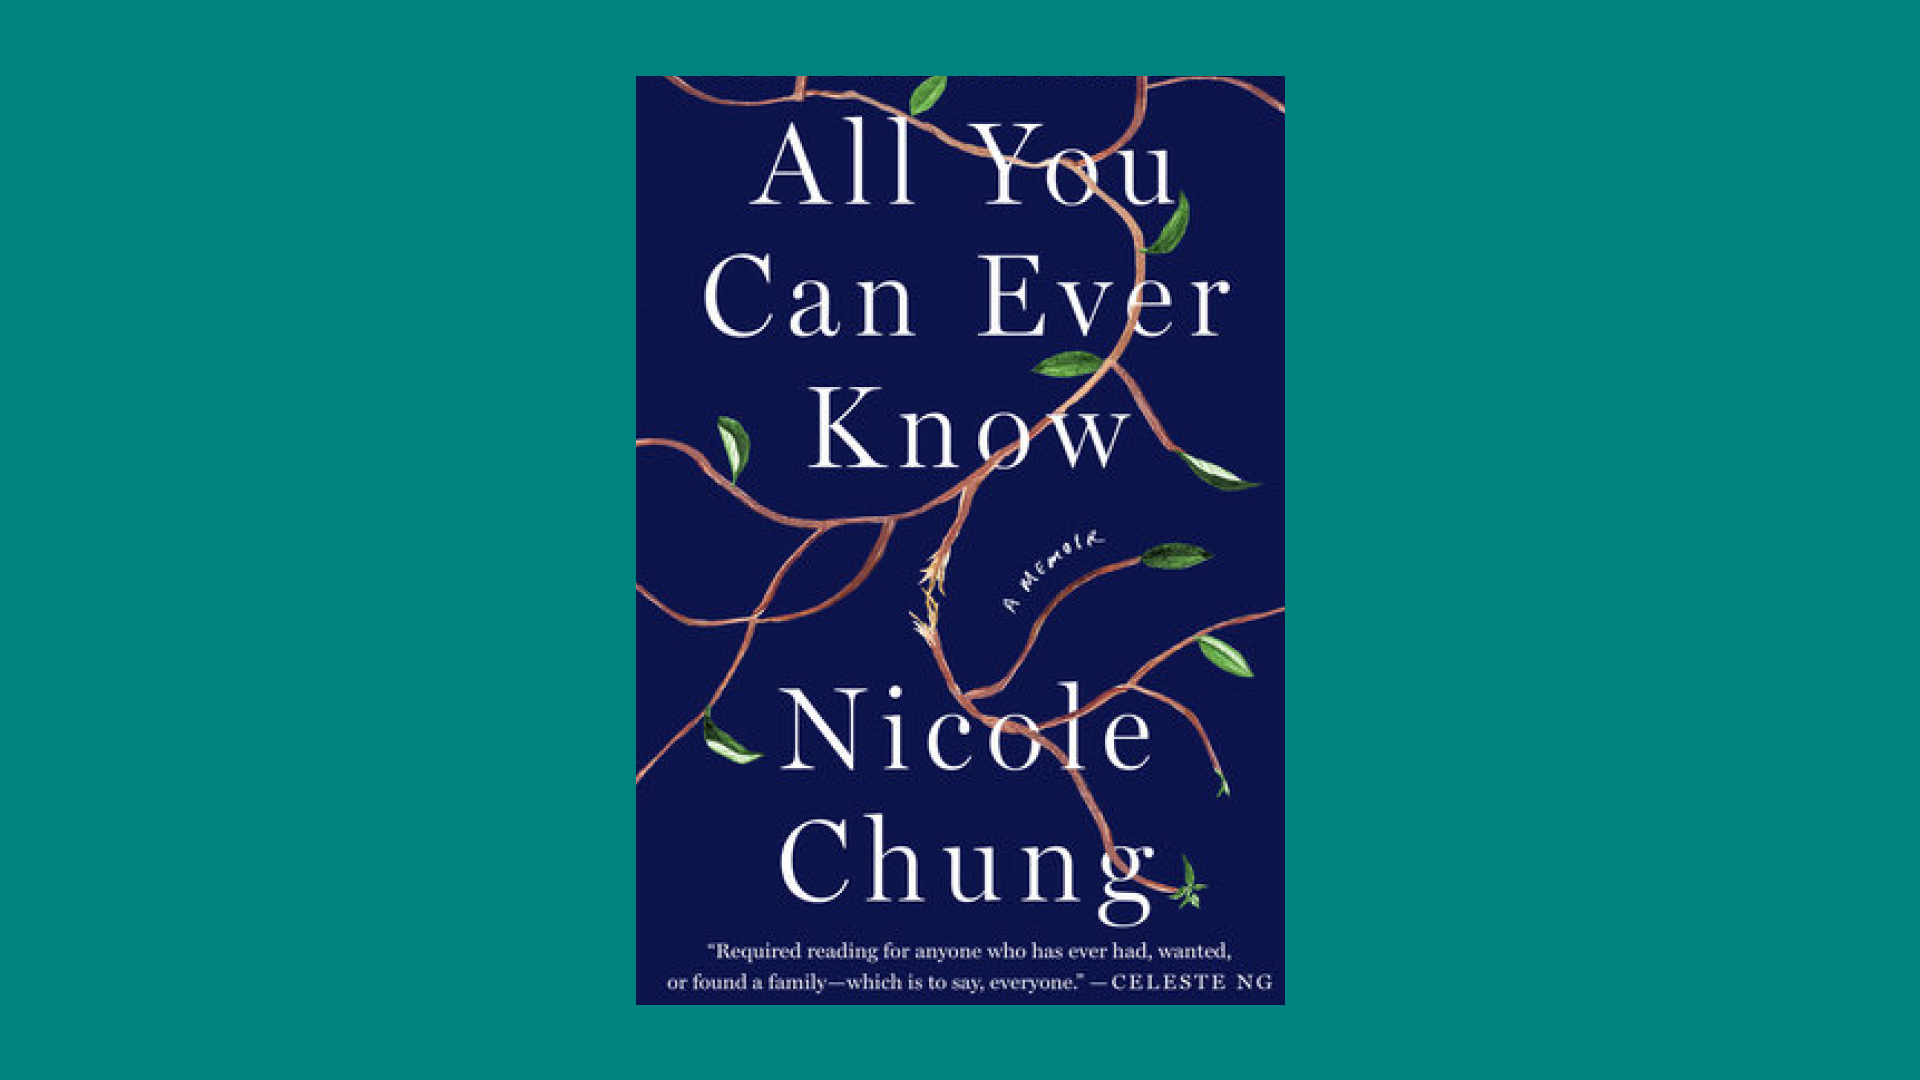 “All You Can Ever Know” by Nicole Chung